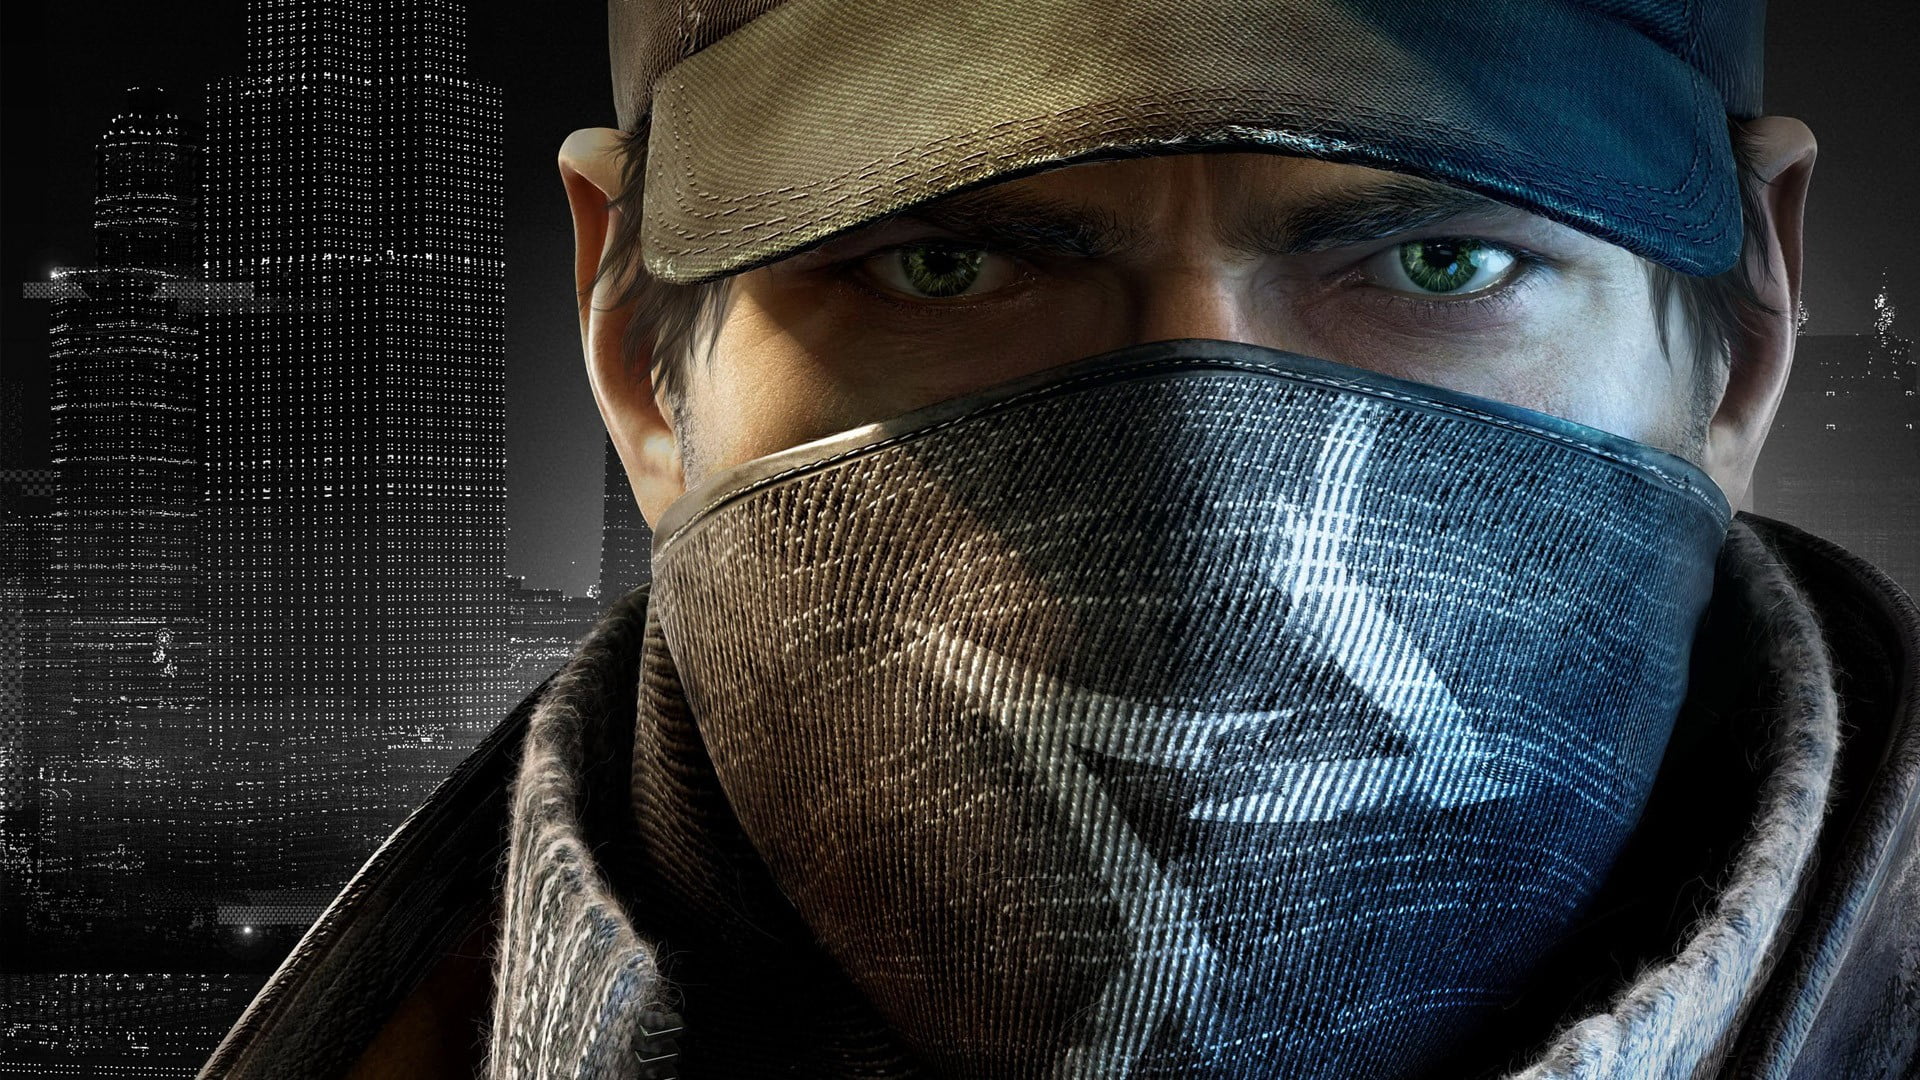 Tom Cruise movie poster, Watch_Dogs, video games, Aiden Pearce